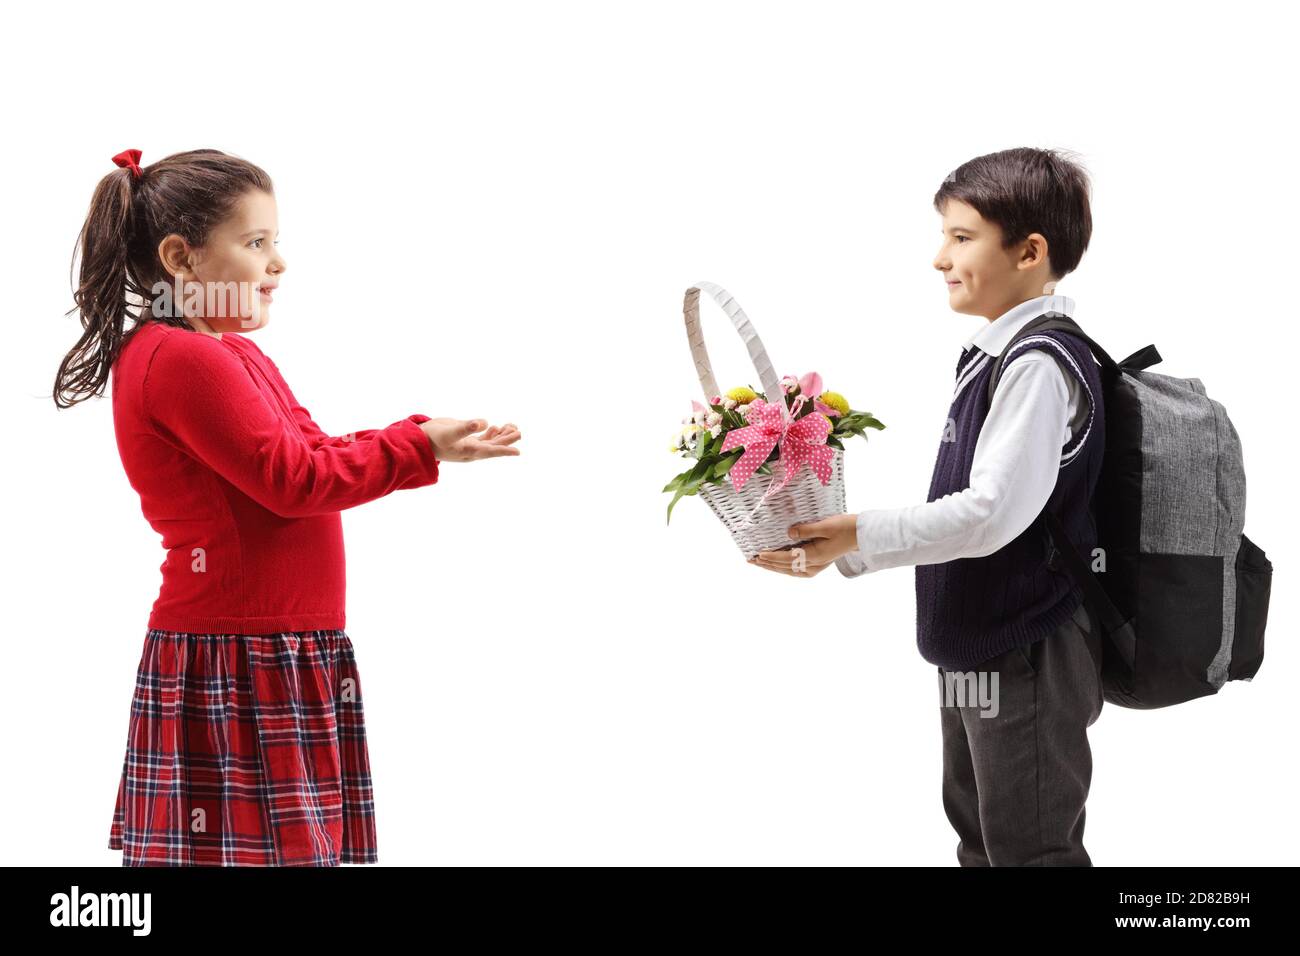 Boy giving a basket with flowers to a little girl isolated on white background Stock Photo